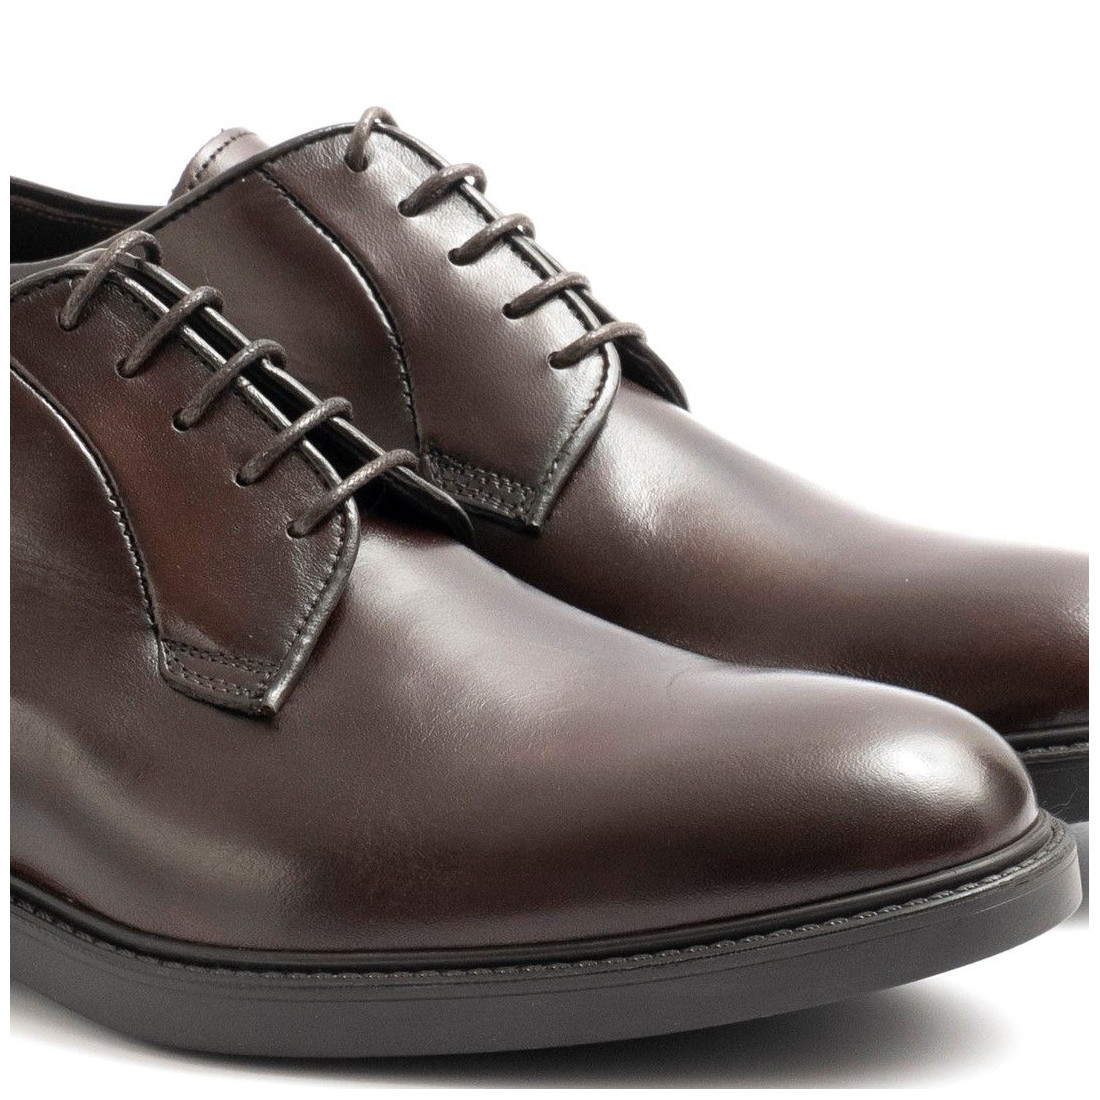 Men's Sangiorgio derby shoes in brown brushed leather